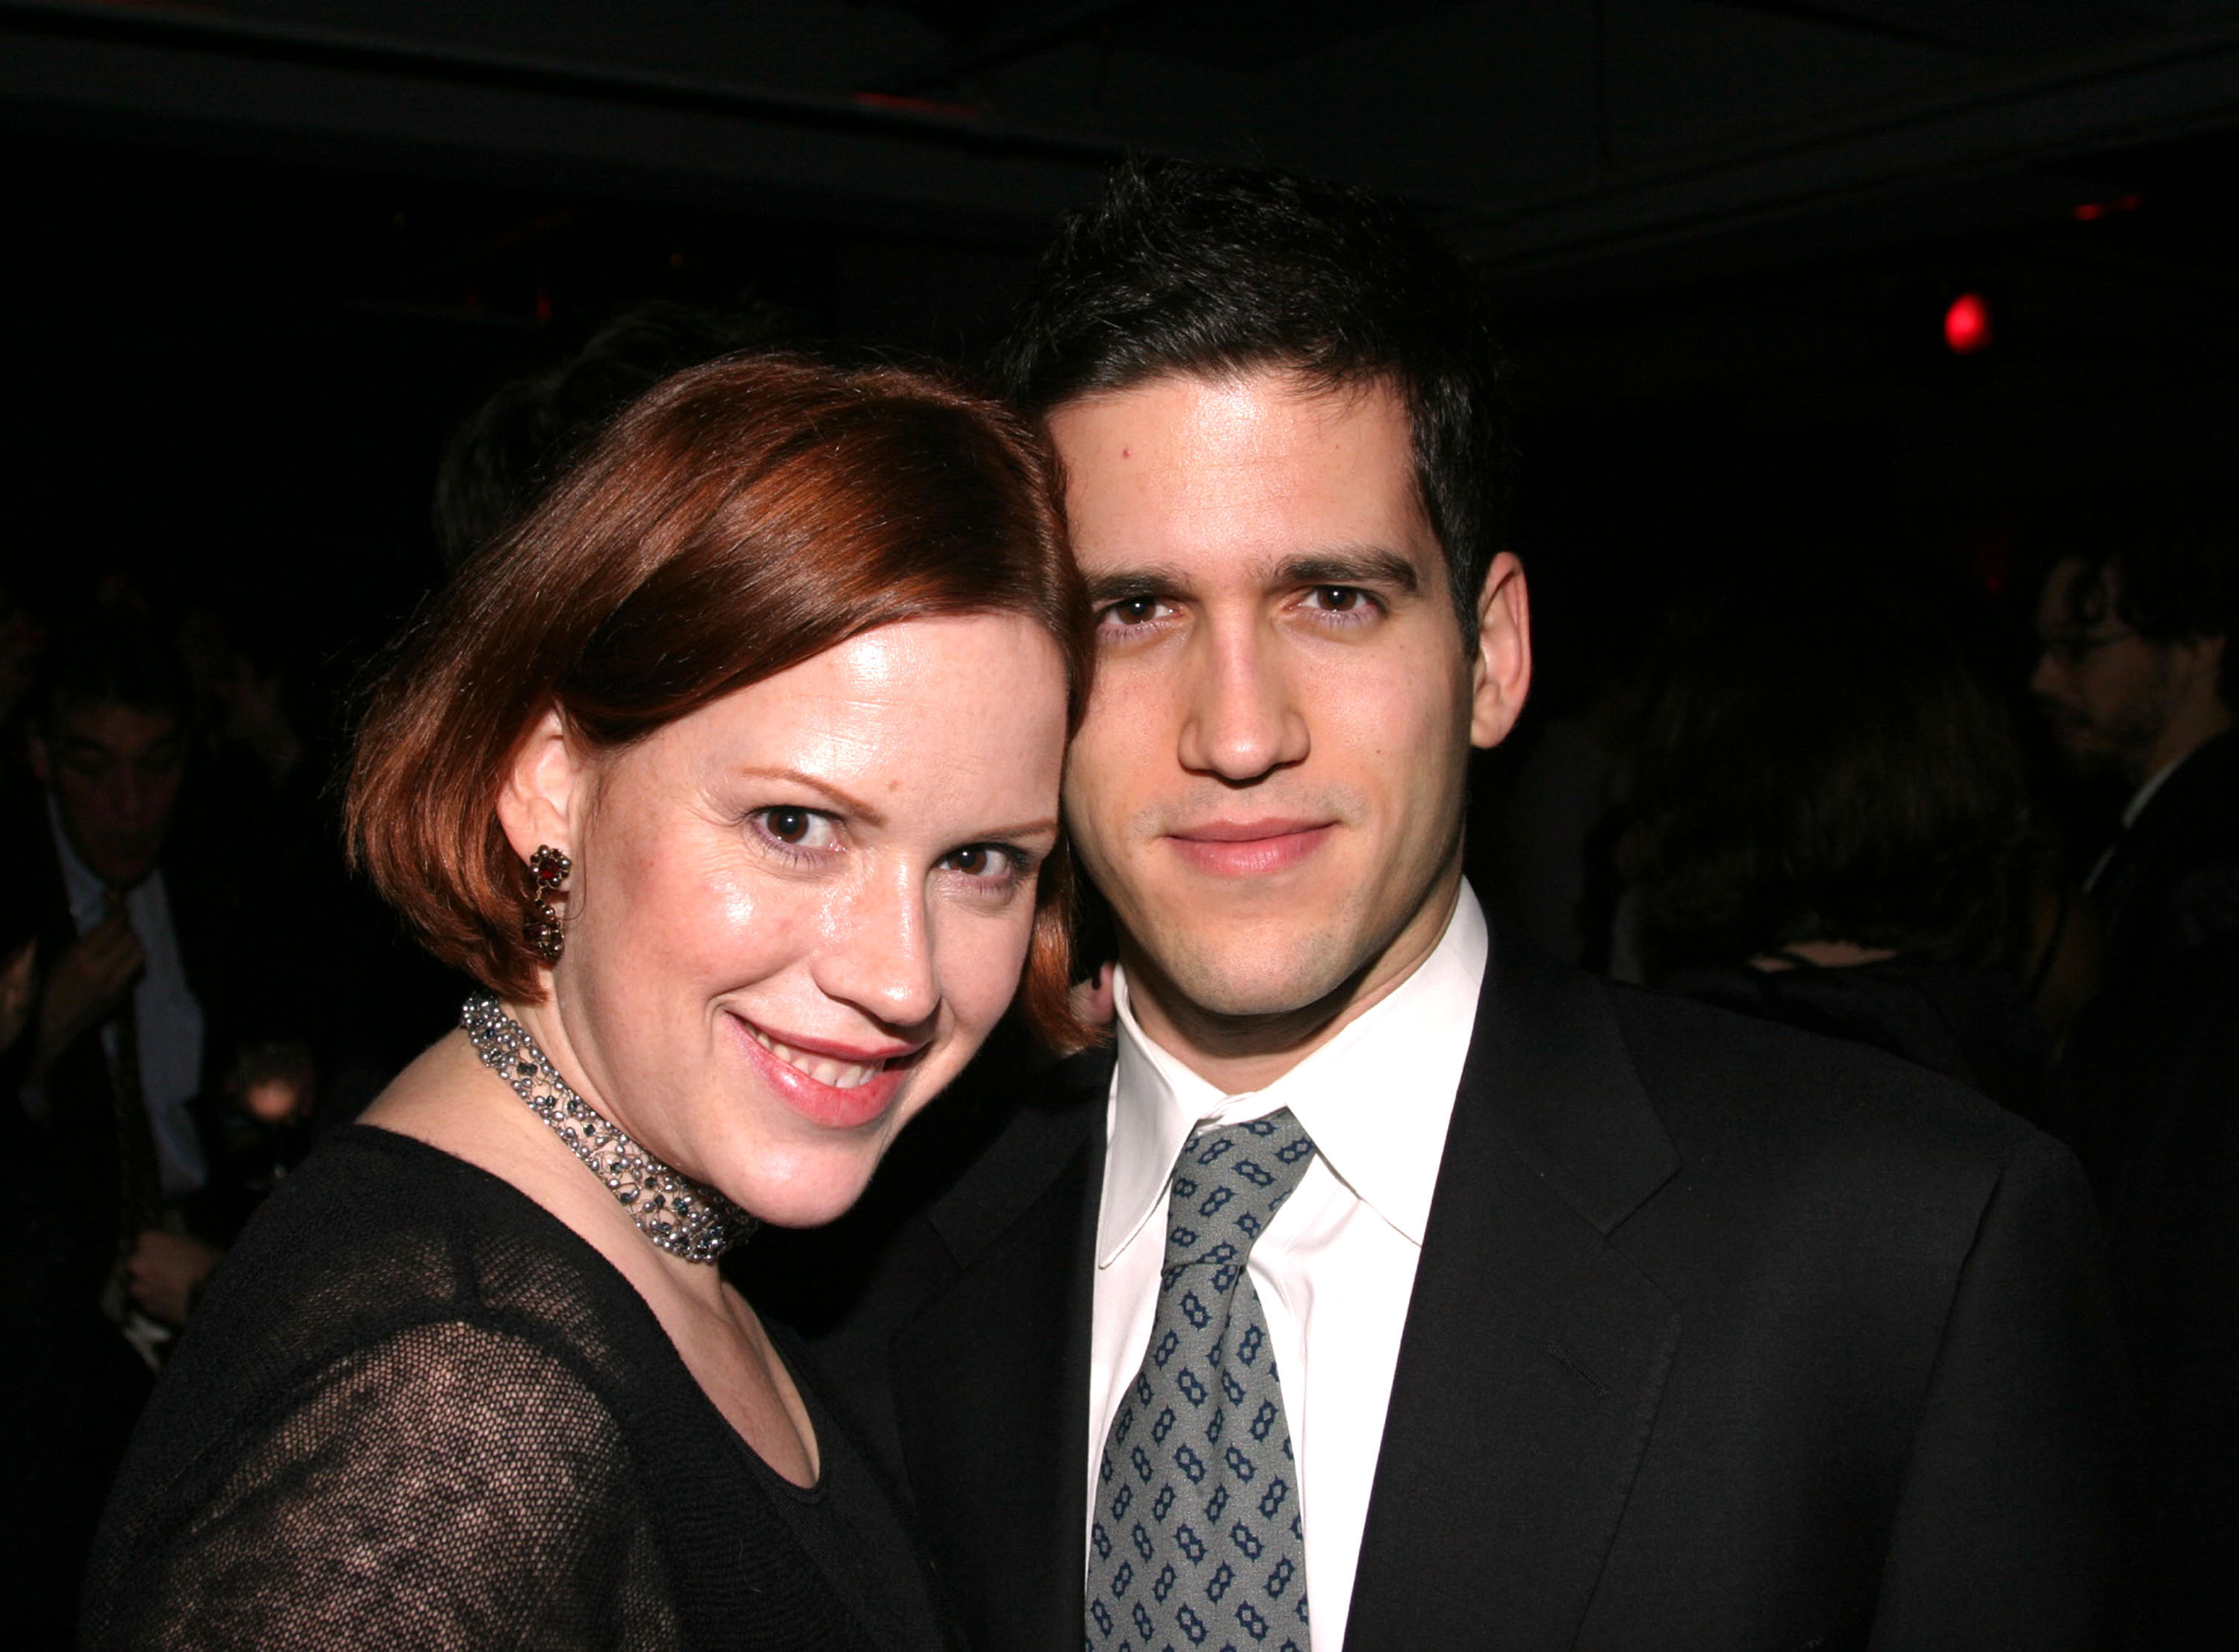 Molly Ringwald and Panio Gianopoulos at Sam Mendes and Rob Marshall's Broadway production of "Cabaret" on January 4, 2004. | Source: Getty Images